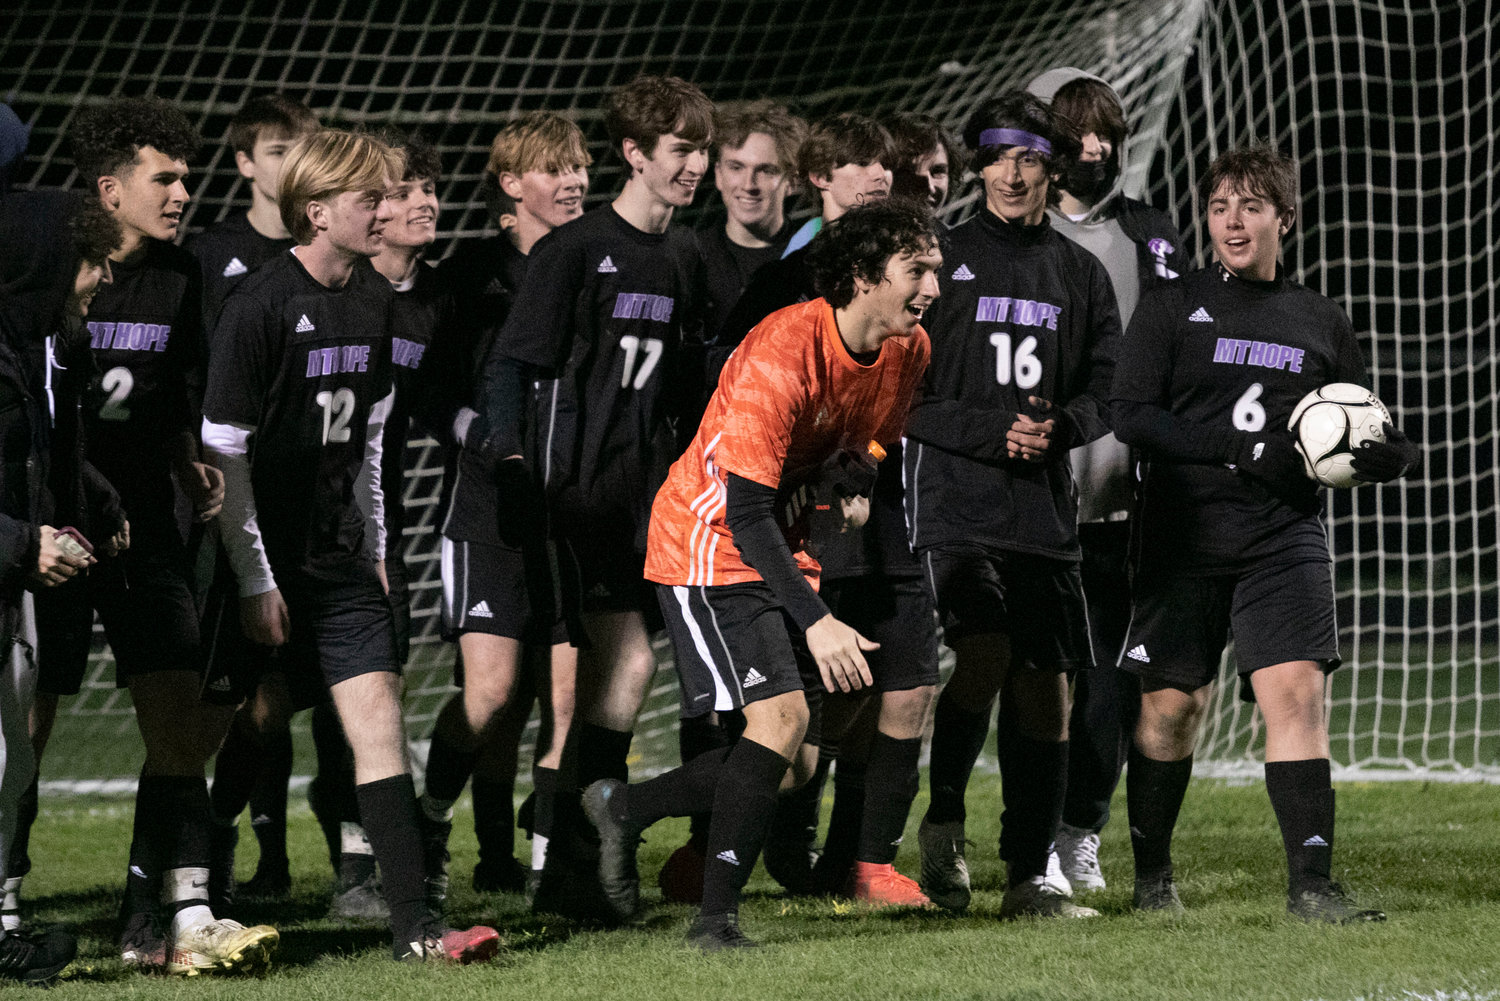 Goalkeeper Matt Terceiro (middle) and teammates celebrate after the game.